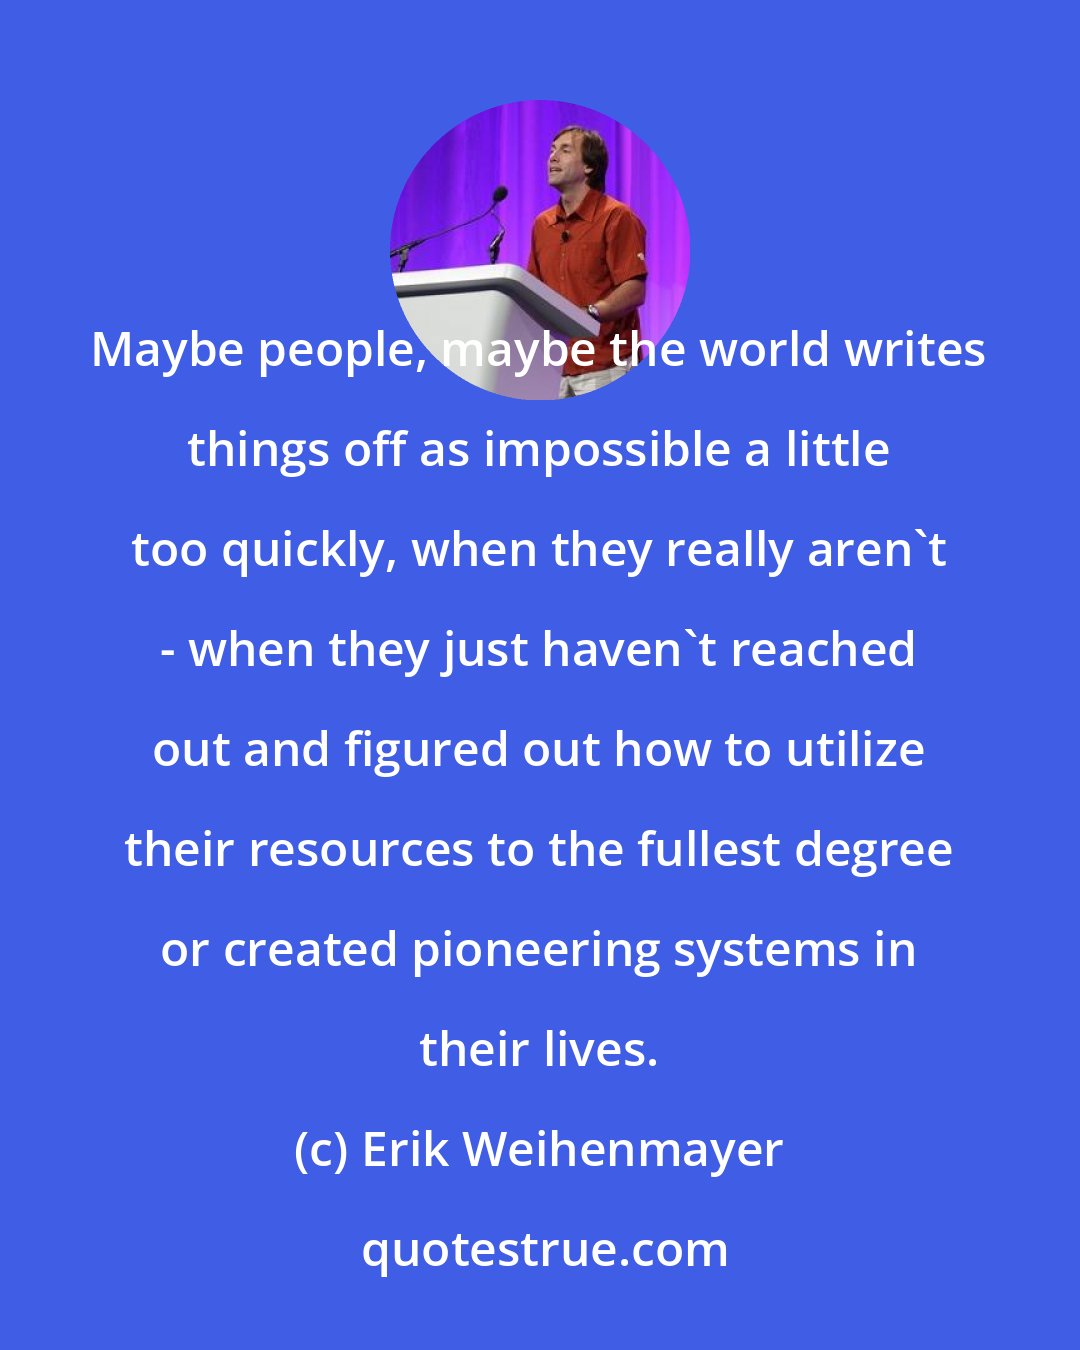 Erik Weihenmayer: Maybe people, maybe the world writes things off as impossible a little too quickly, when they really aren't - when they just haven't reached out and figured out how to utilize their resources to the fullest degree or created pioneering systems in their lives.